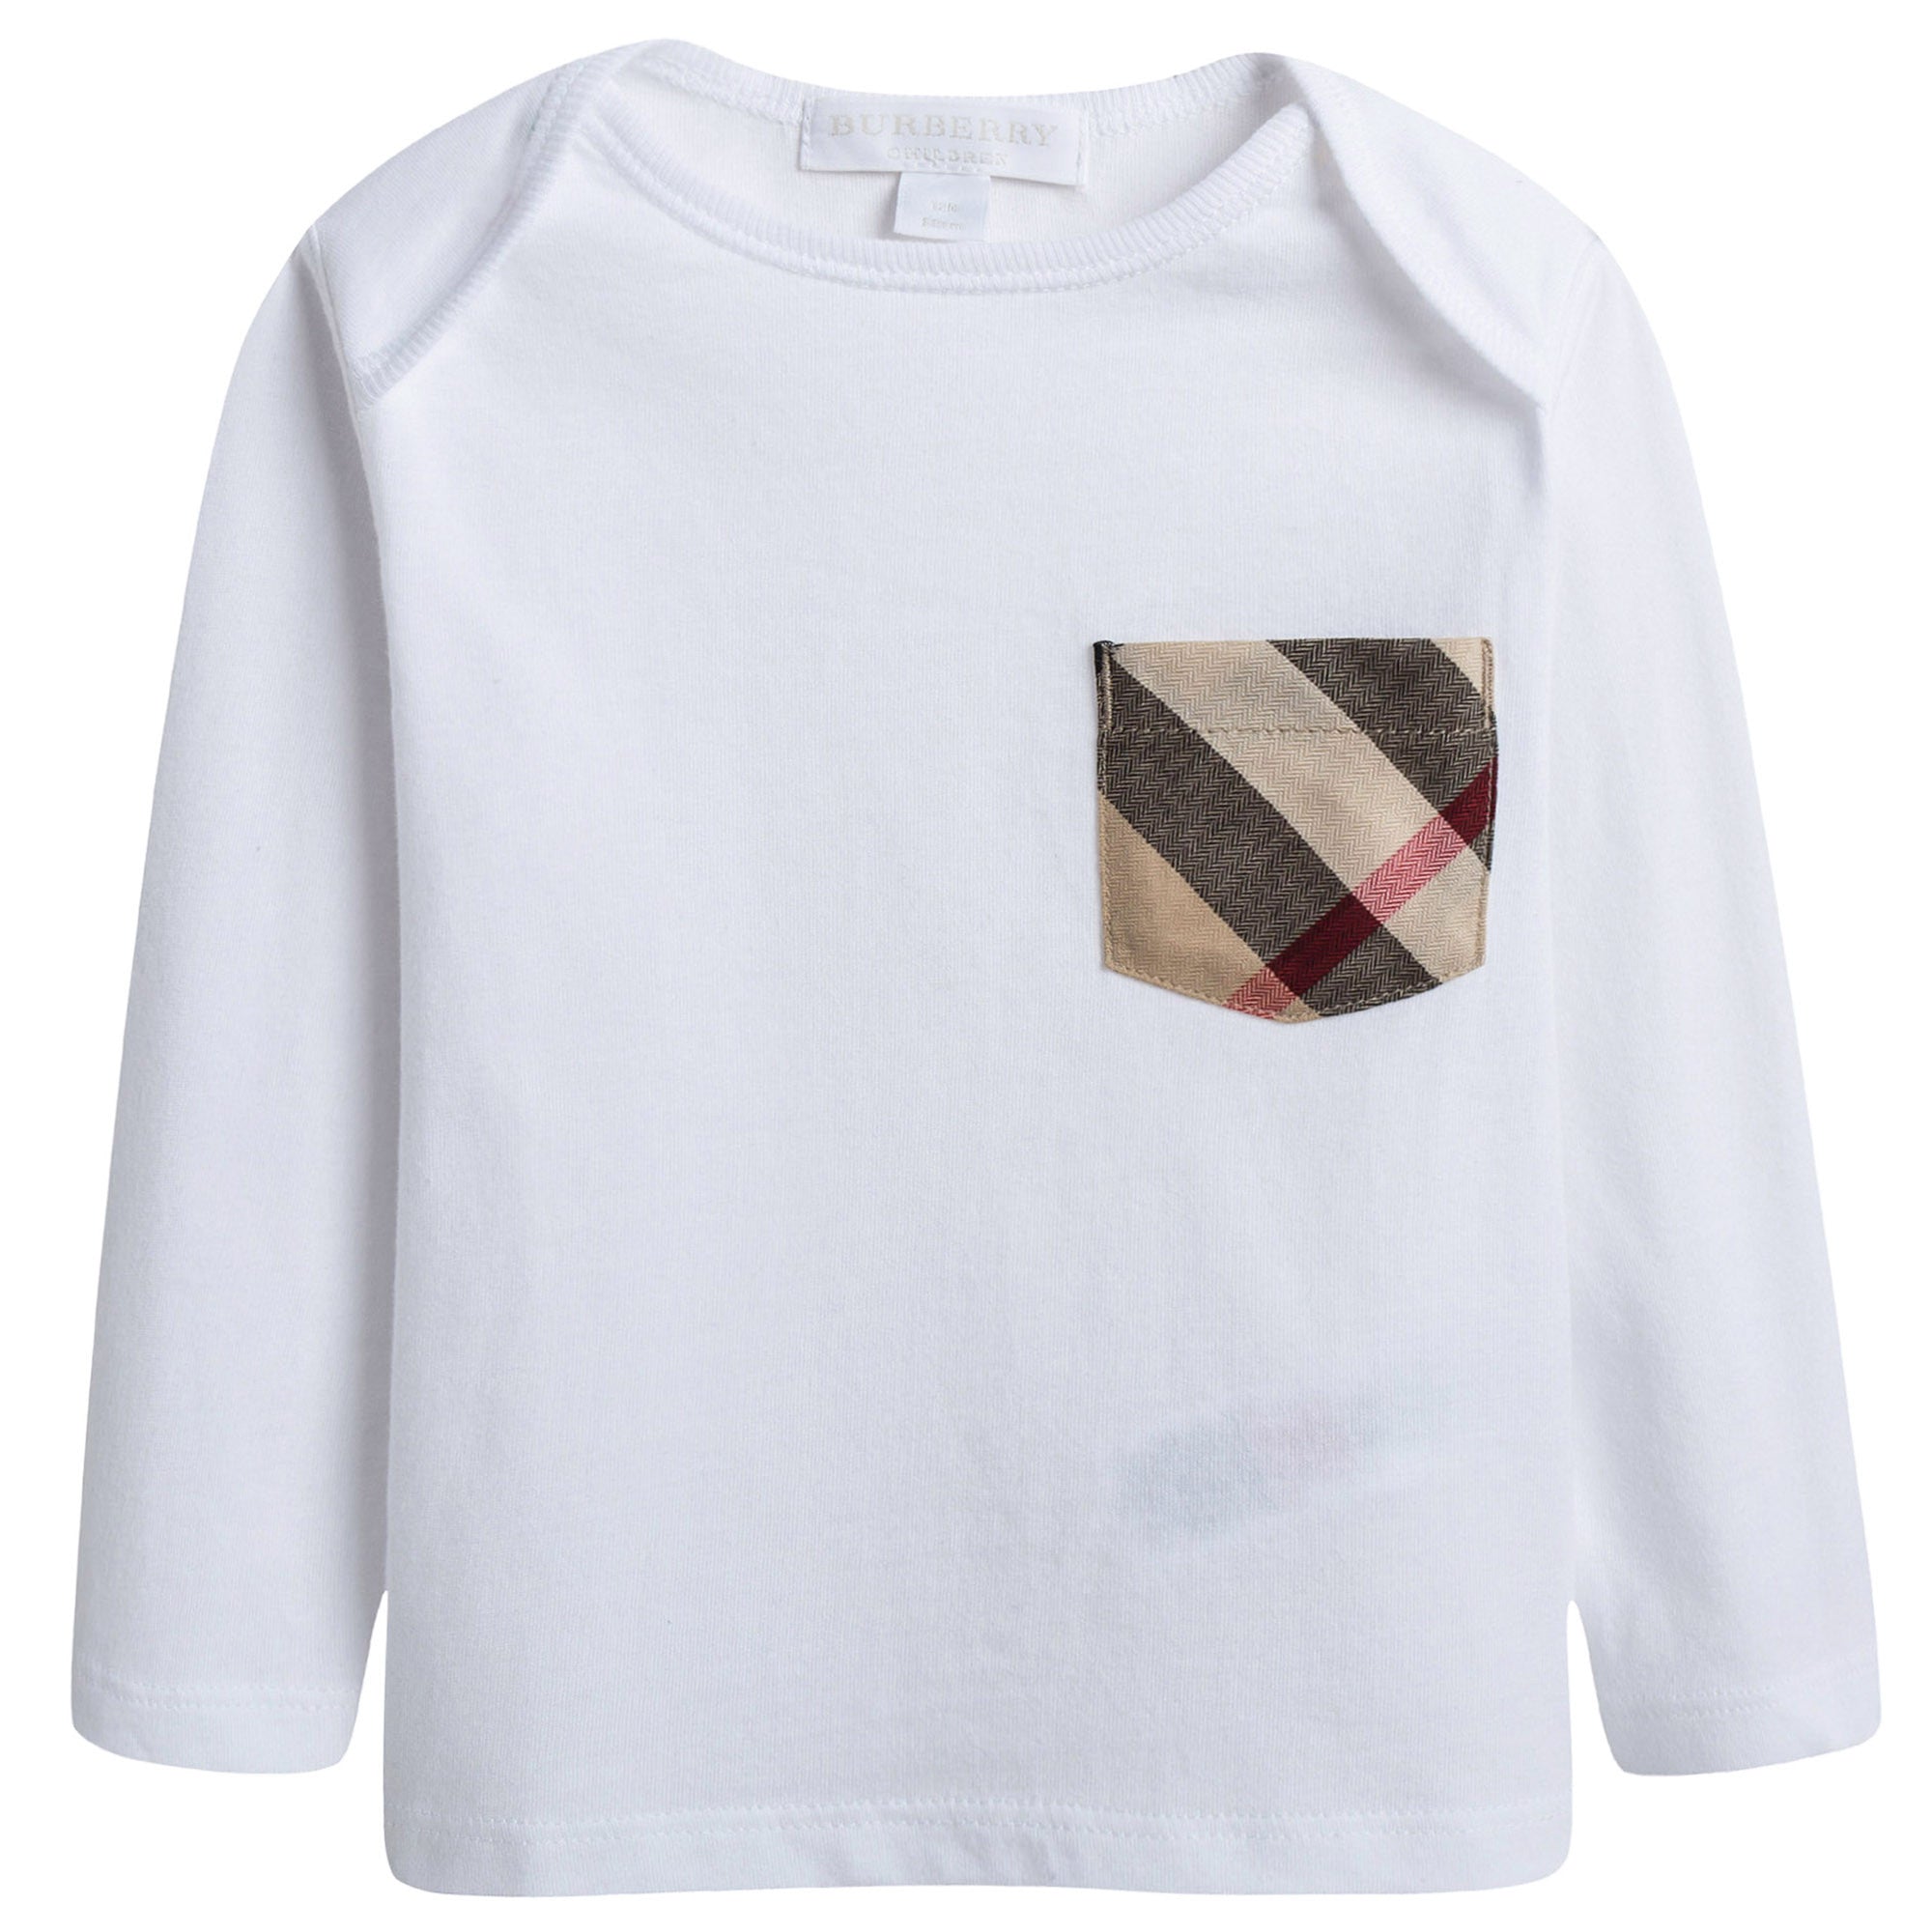 Baby White Cotton Long Sleeves T-shirt With Check Pocket